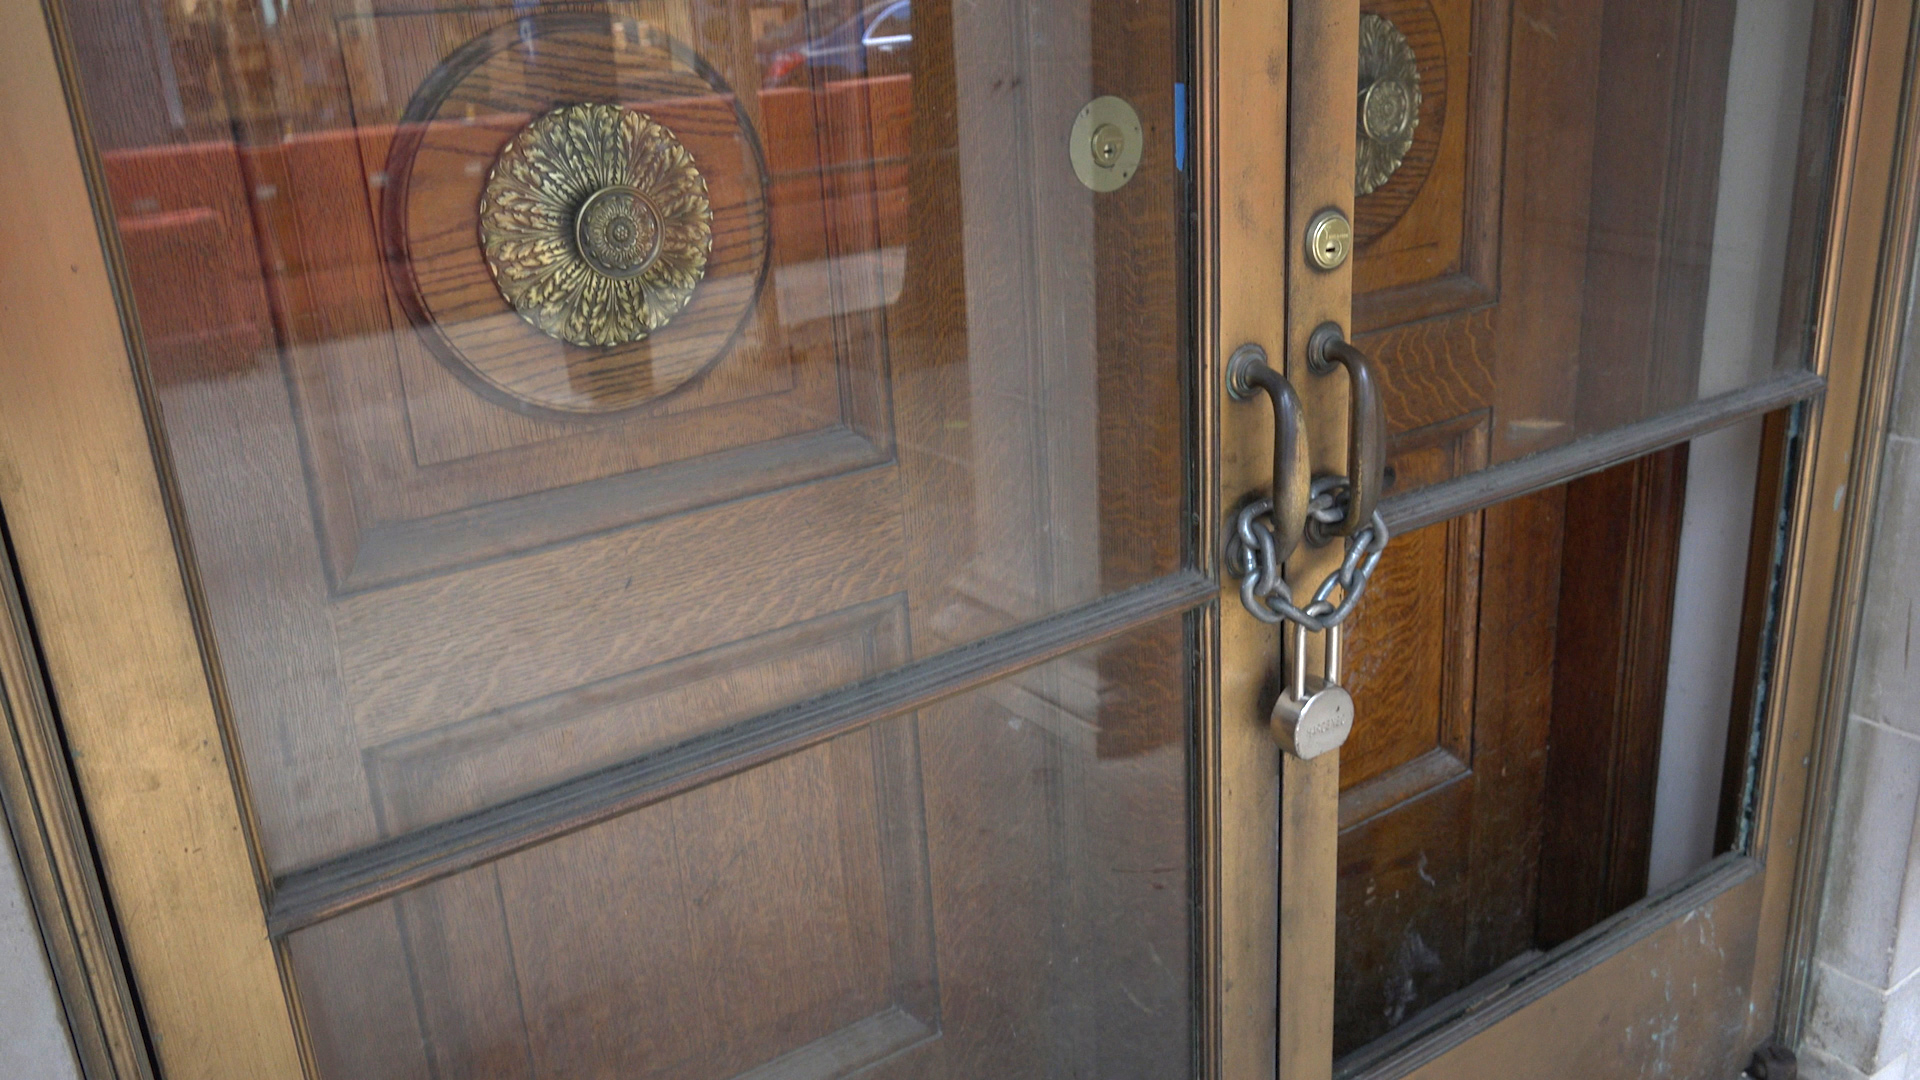 The locked doors of the Knoedler Gallery in Manhattan from the film 